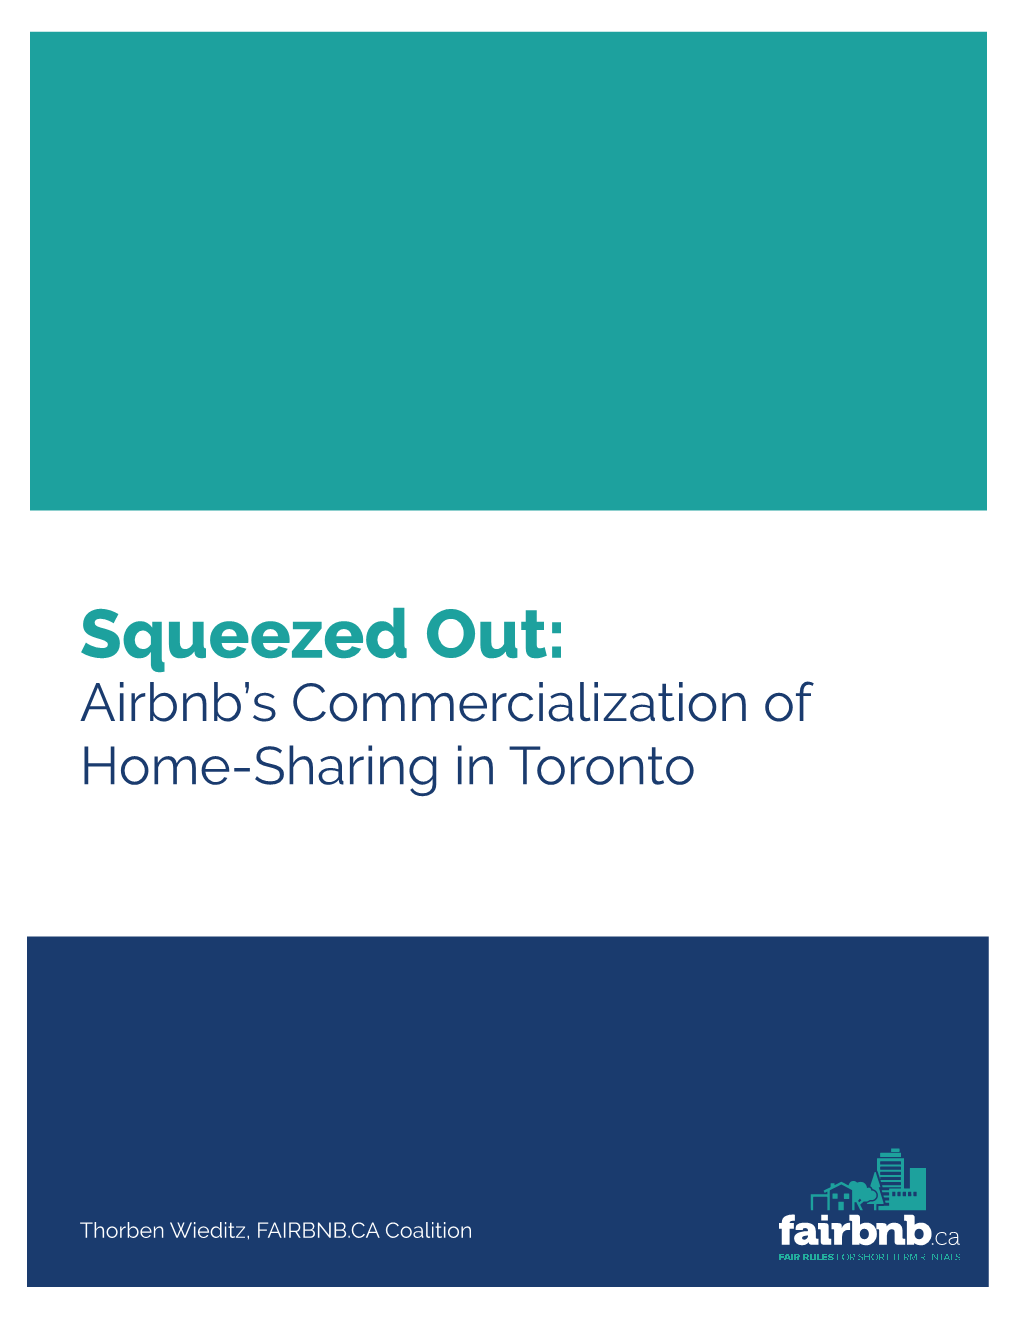 Squeezed Out: Airbnb’S Commercialization of Home-Sharing in Toronto